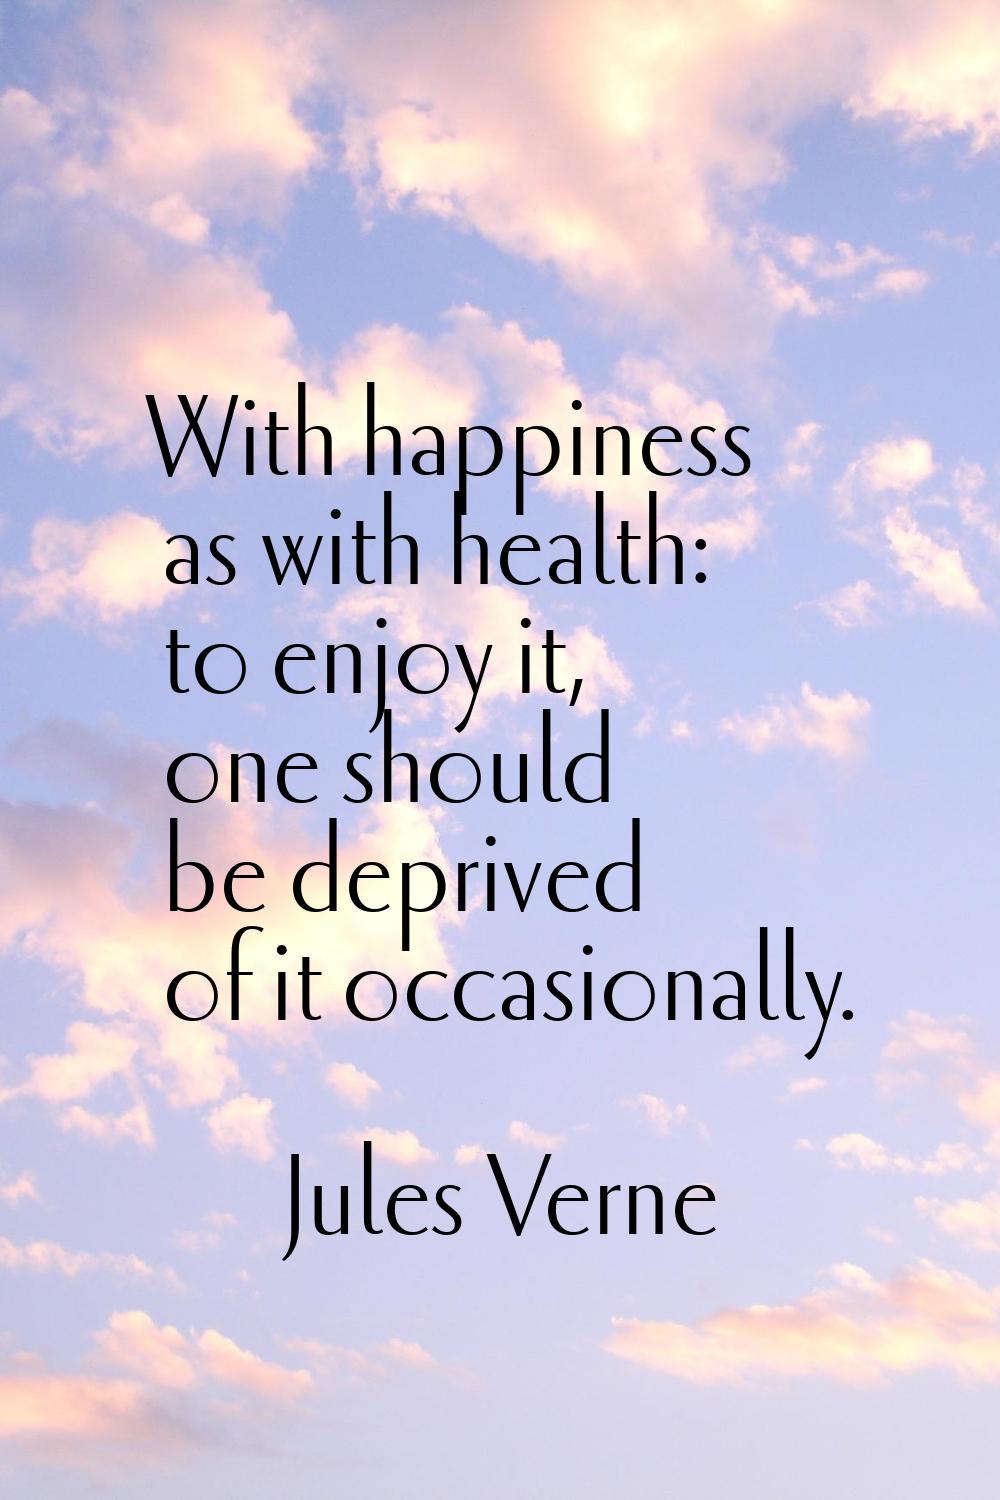 With happiness as with health: to enjoy it, one should be deprived of it occasionally.